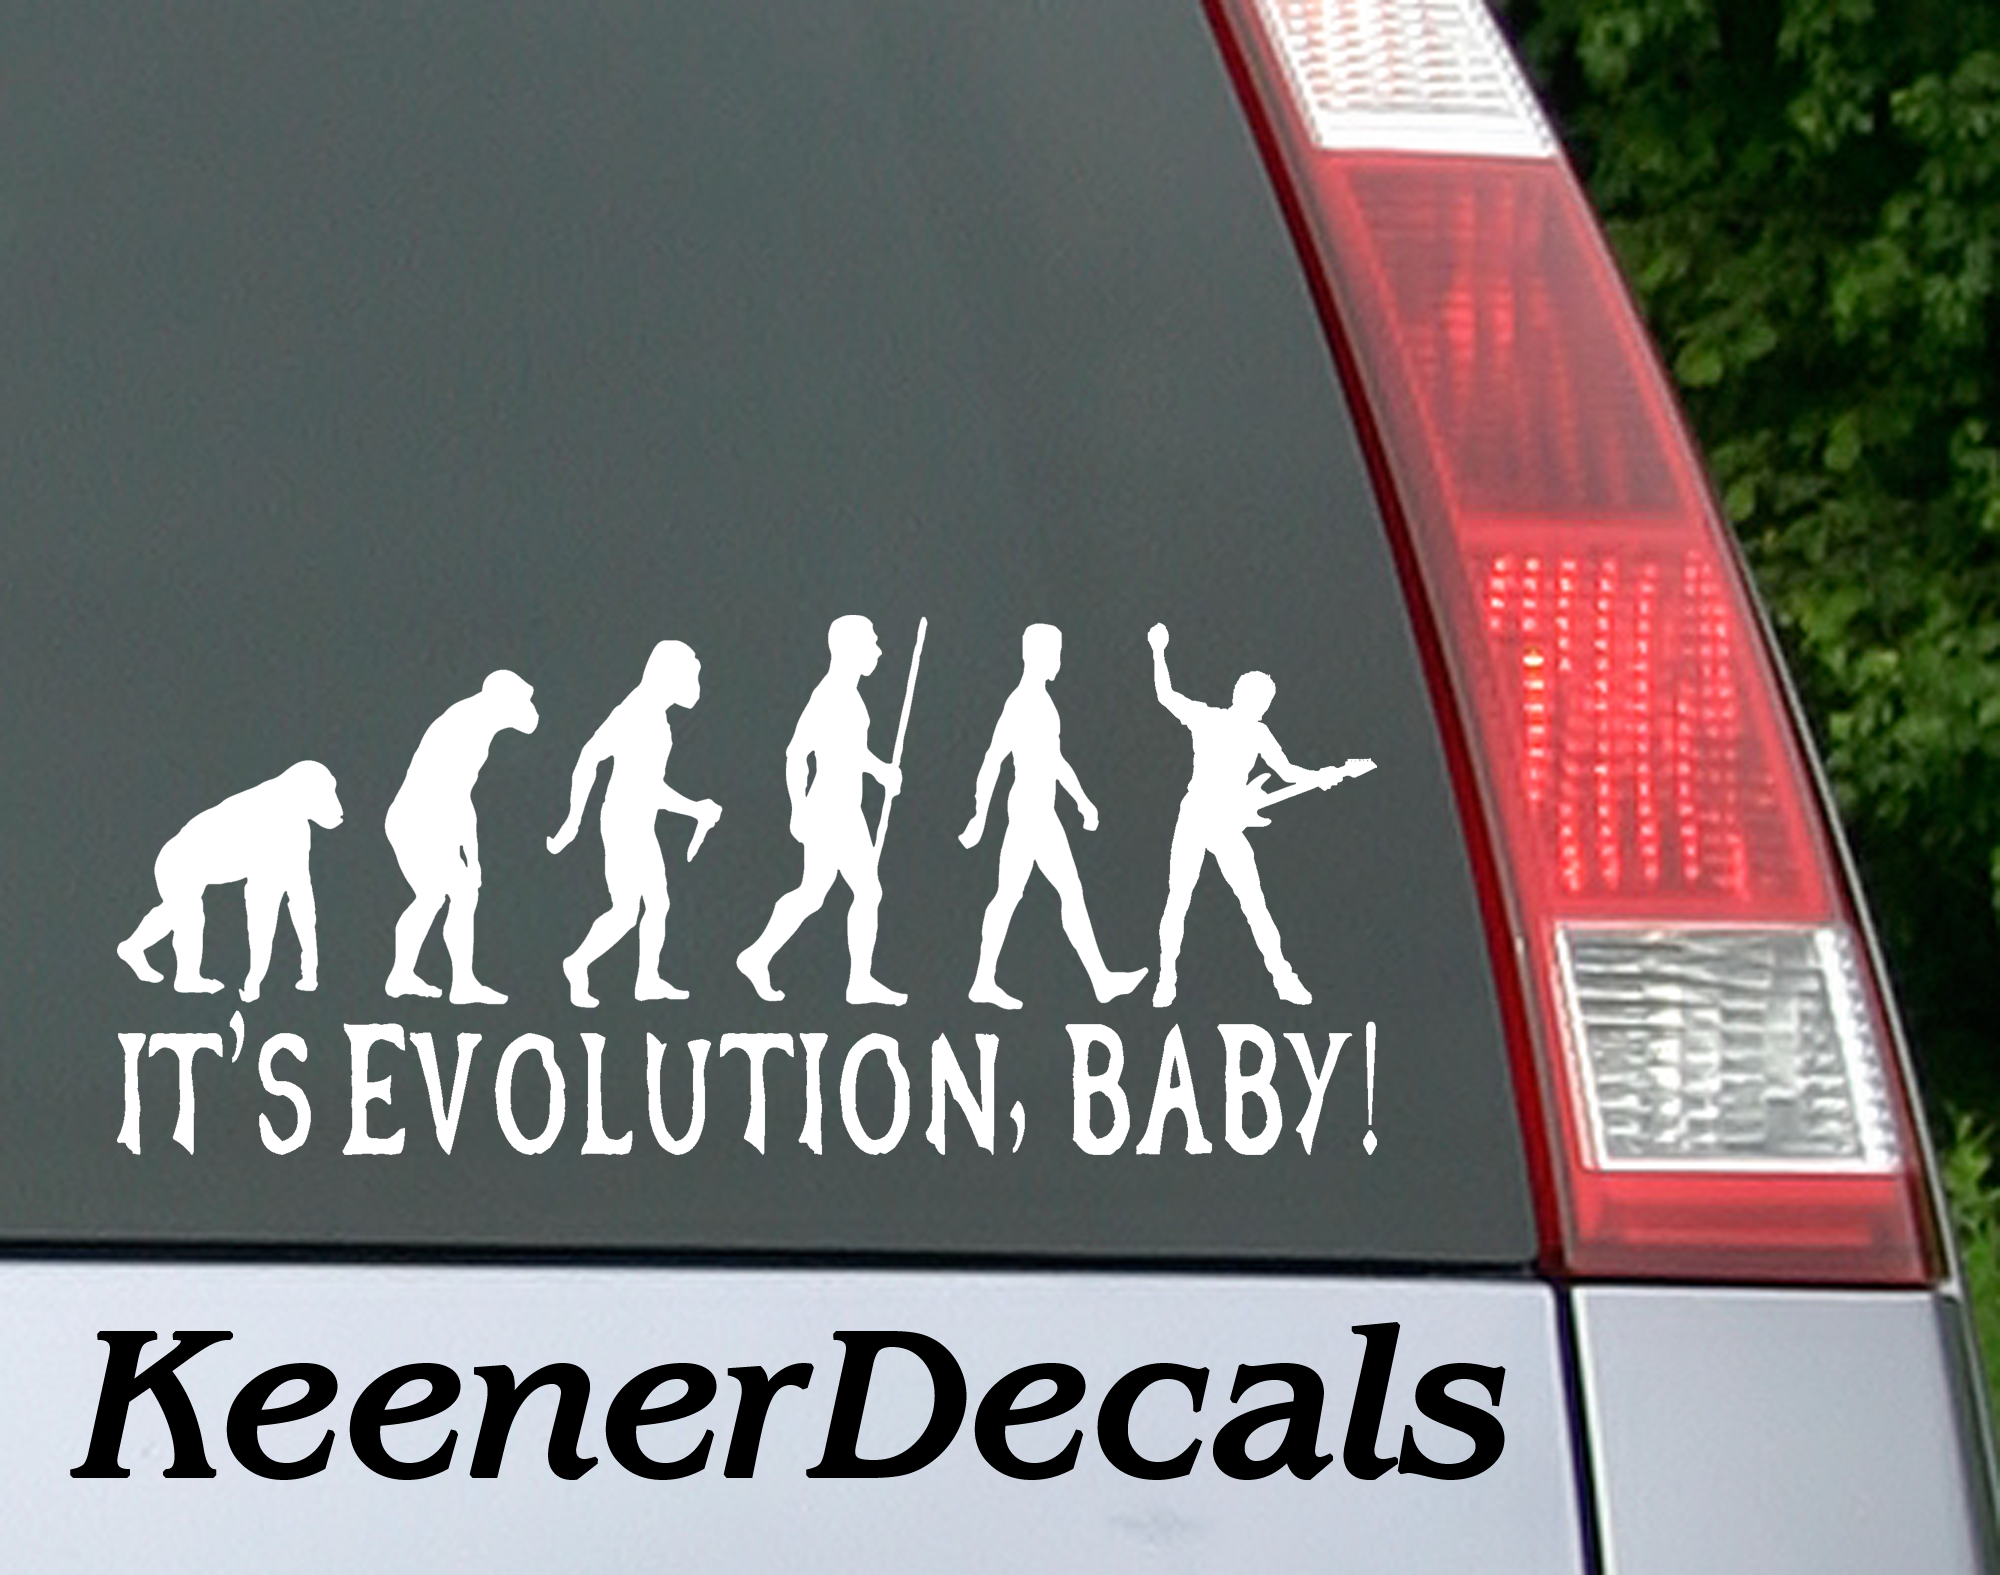 It's Evolution, Baby funny vinyl car decal. Only Pearl Jam fans will get this reference. 7"W x 2.5"H Funny Car Decal, Car Sticker, Car Vinyl, Bumper Sticker, Vinyl Stickers, Vinyl Sticker.